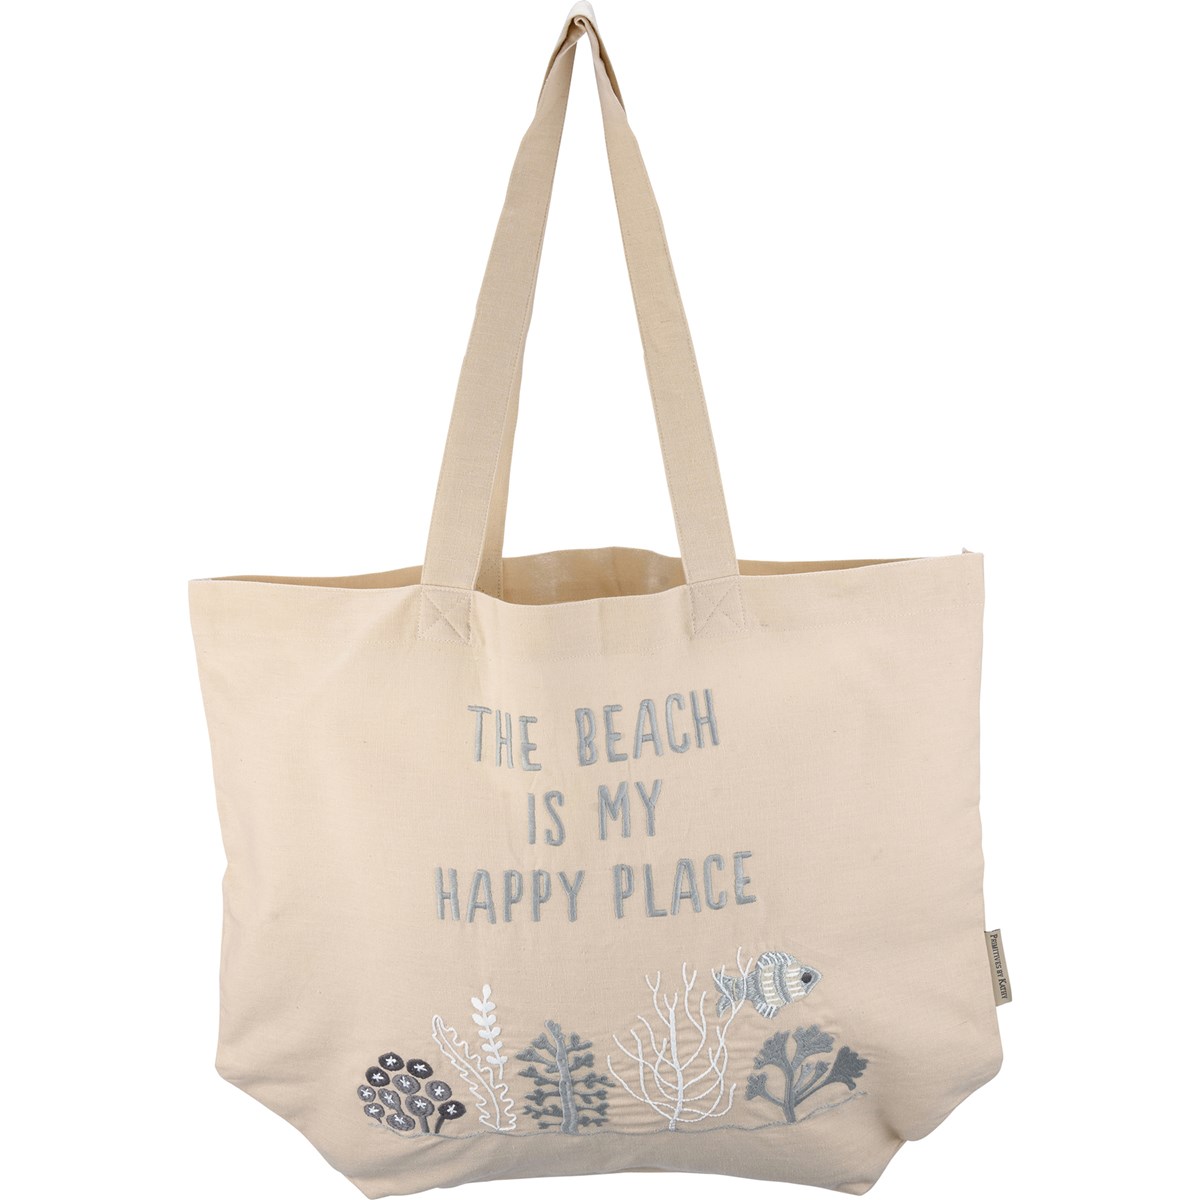 The Beach Is My Happy Place Tote - Cotton